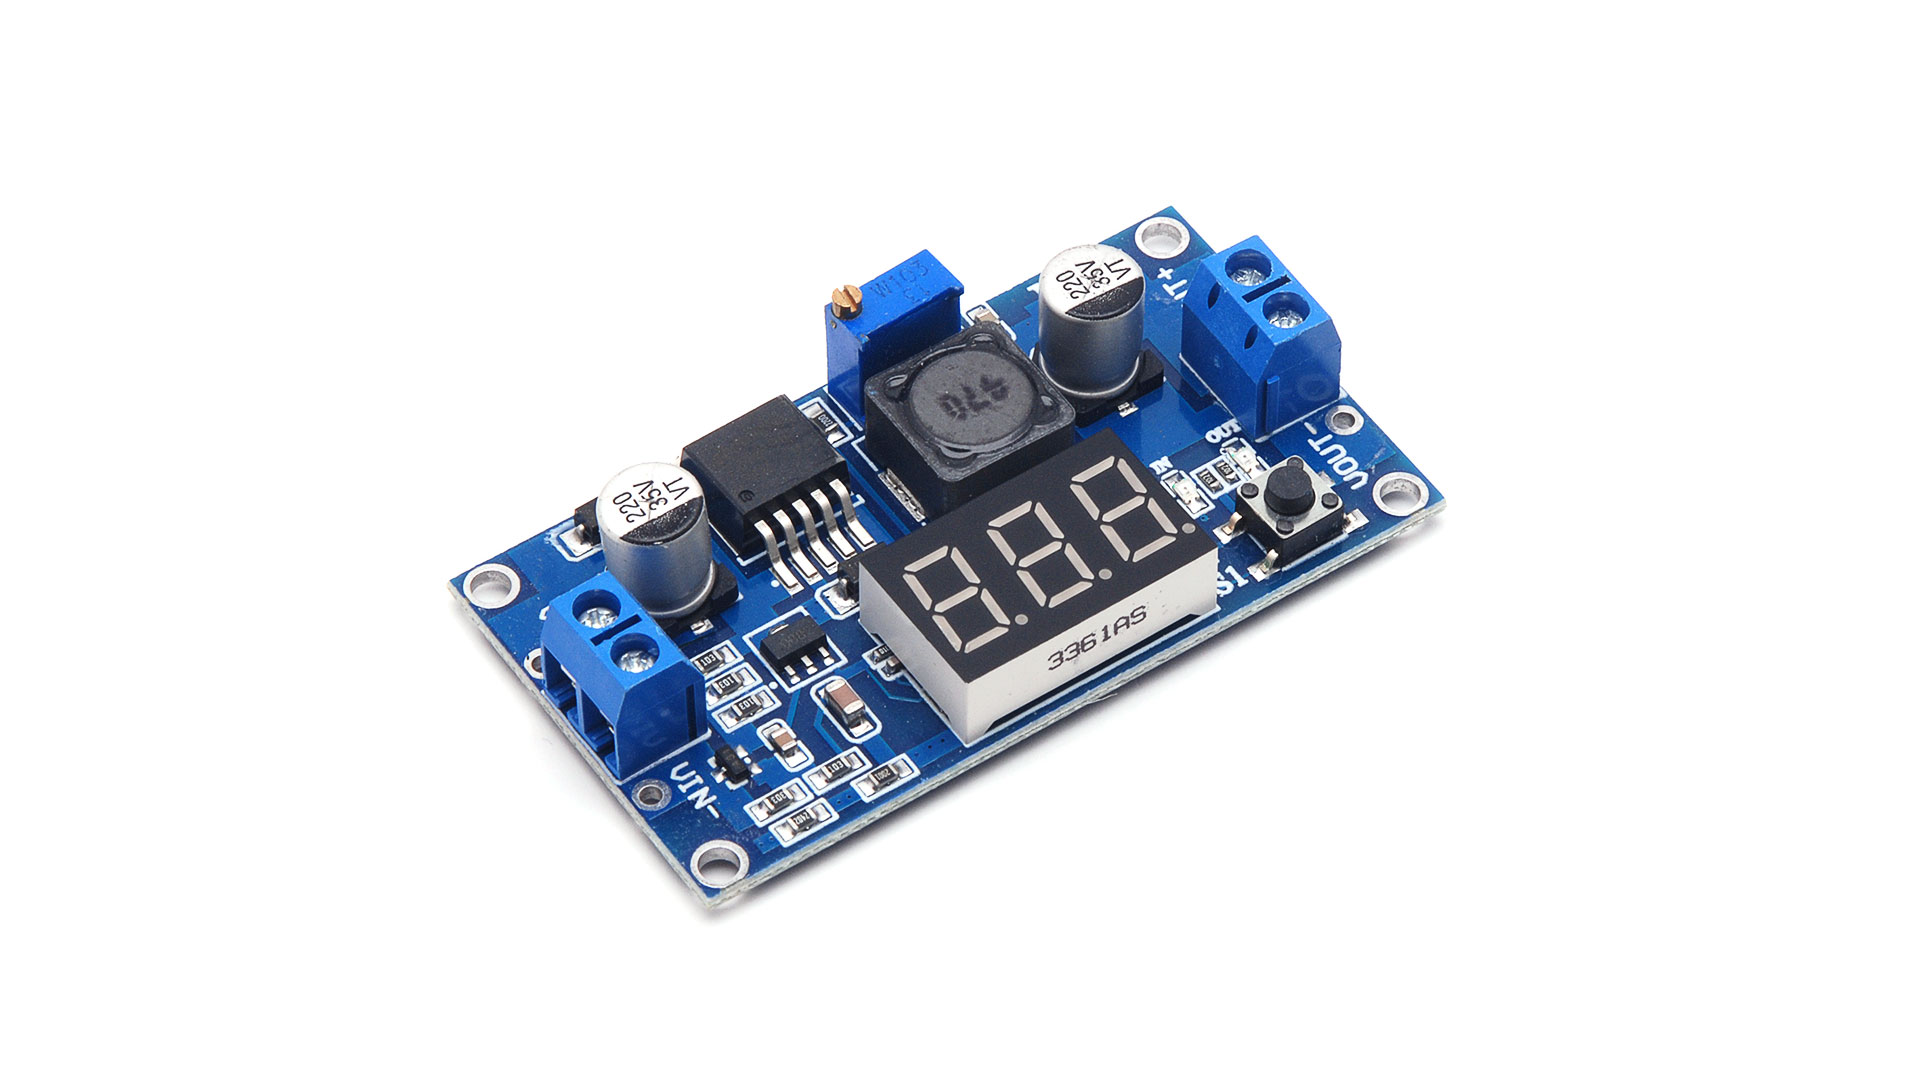 DC/DC STEP-DOWN converter LM2596S 1.5-35V 3A with display